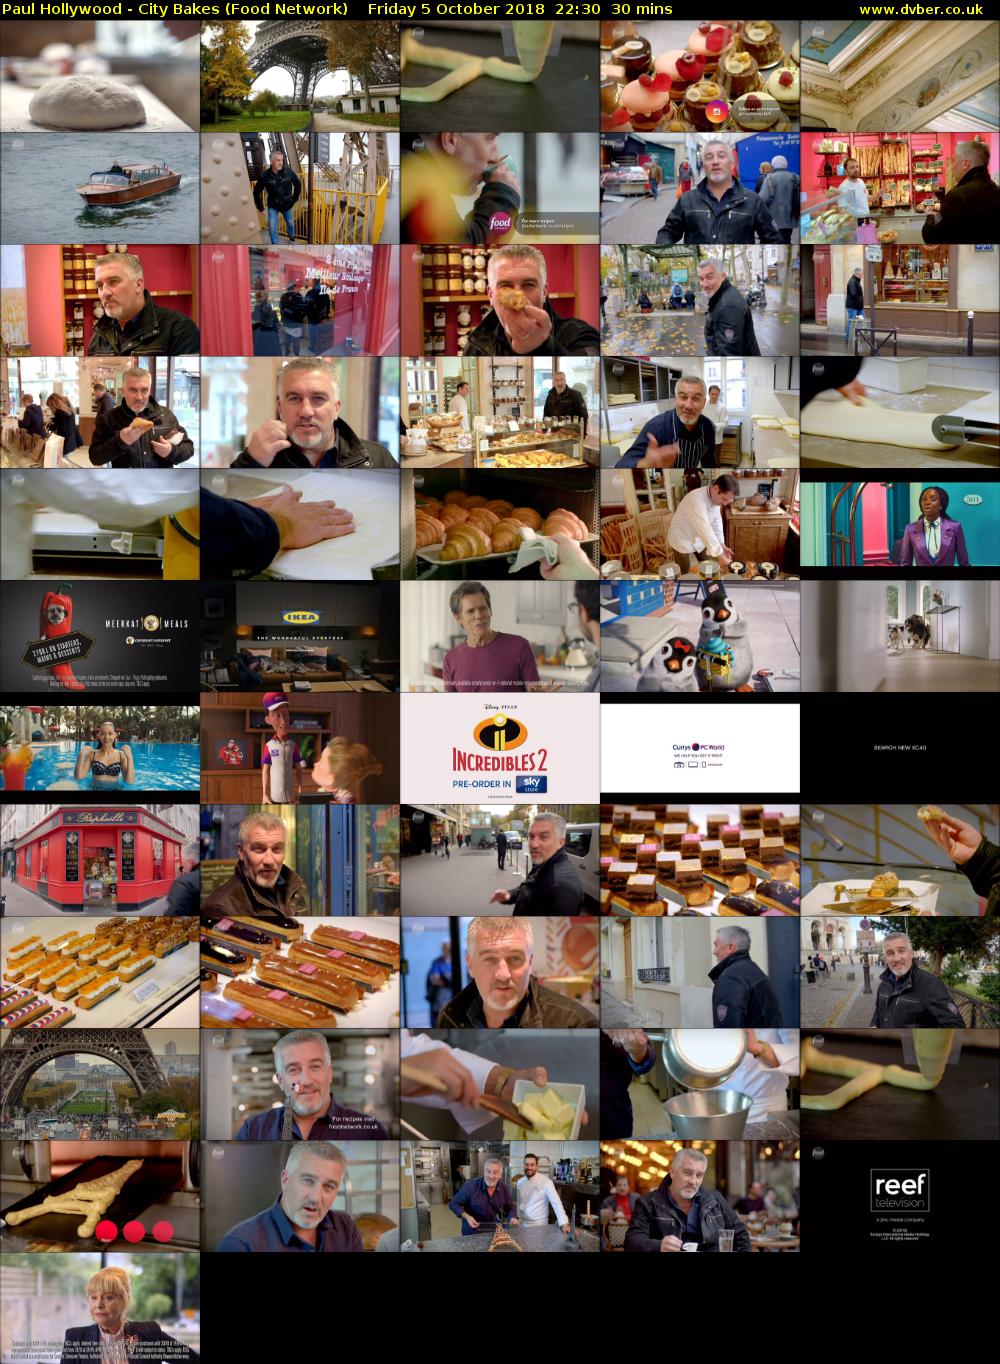 Paul Hollywood - City Bakes (Food Network) Friday 5 October 2018 22:30 - 23:00